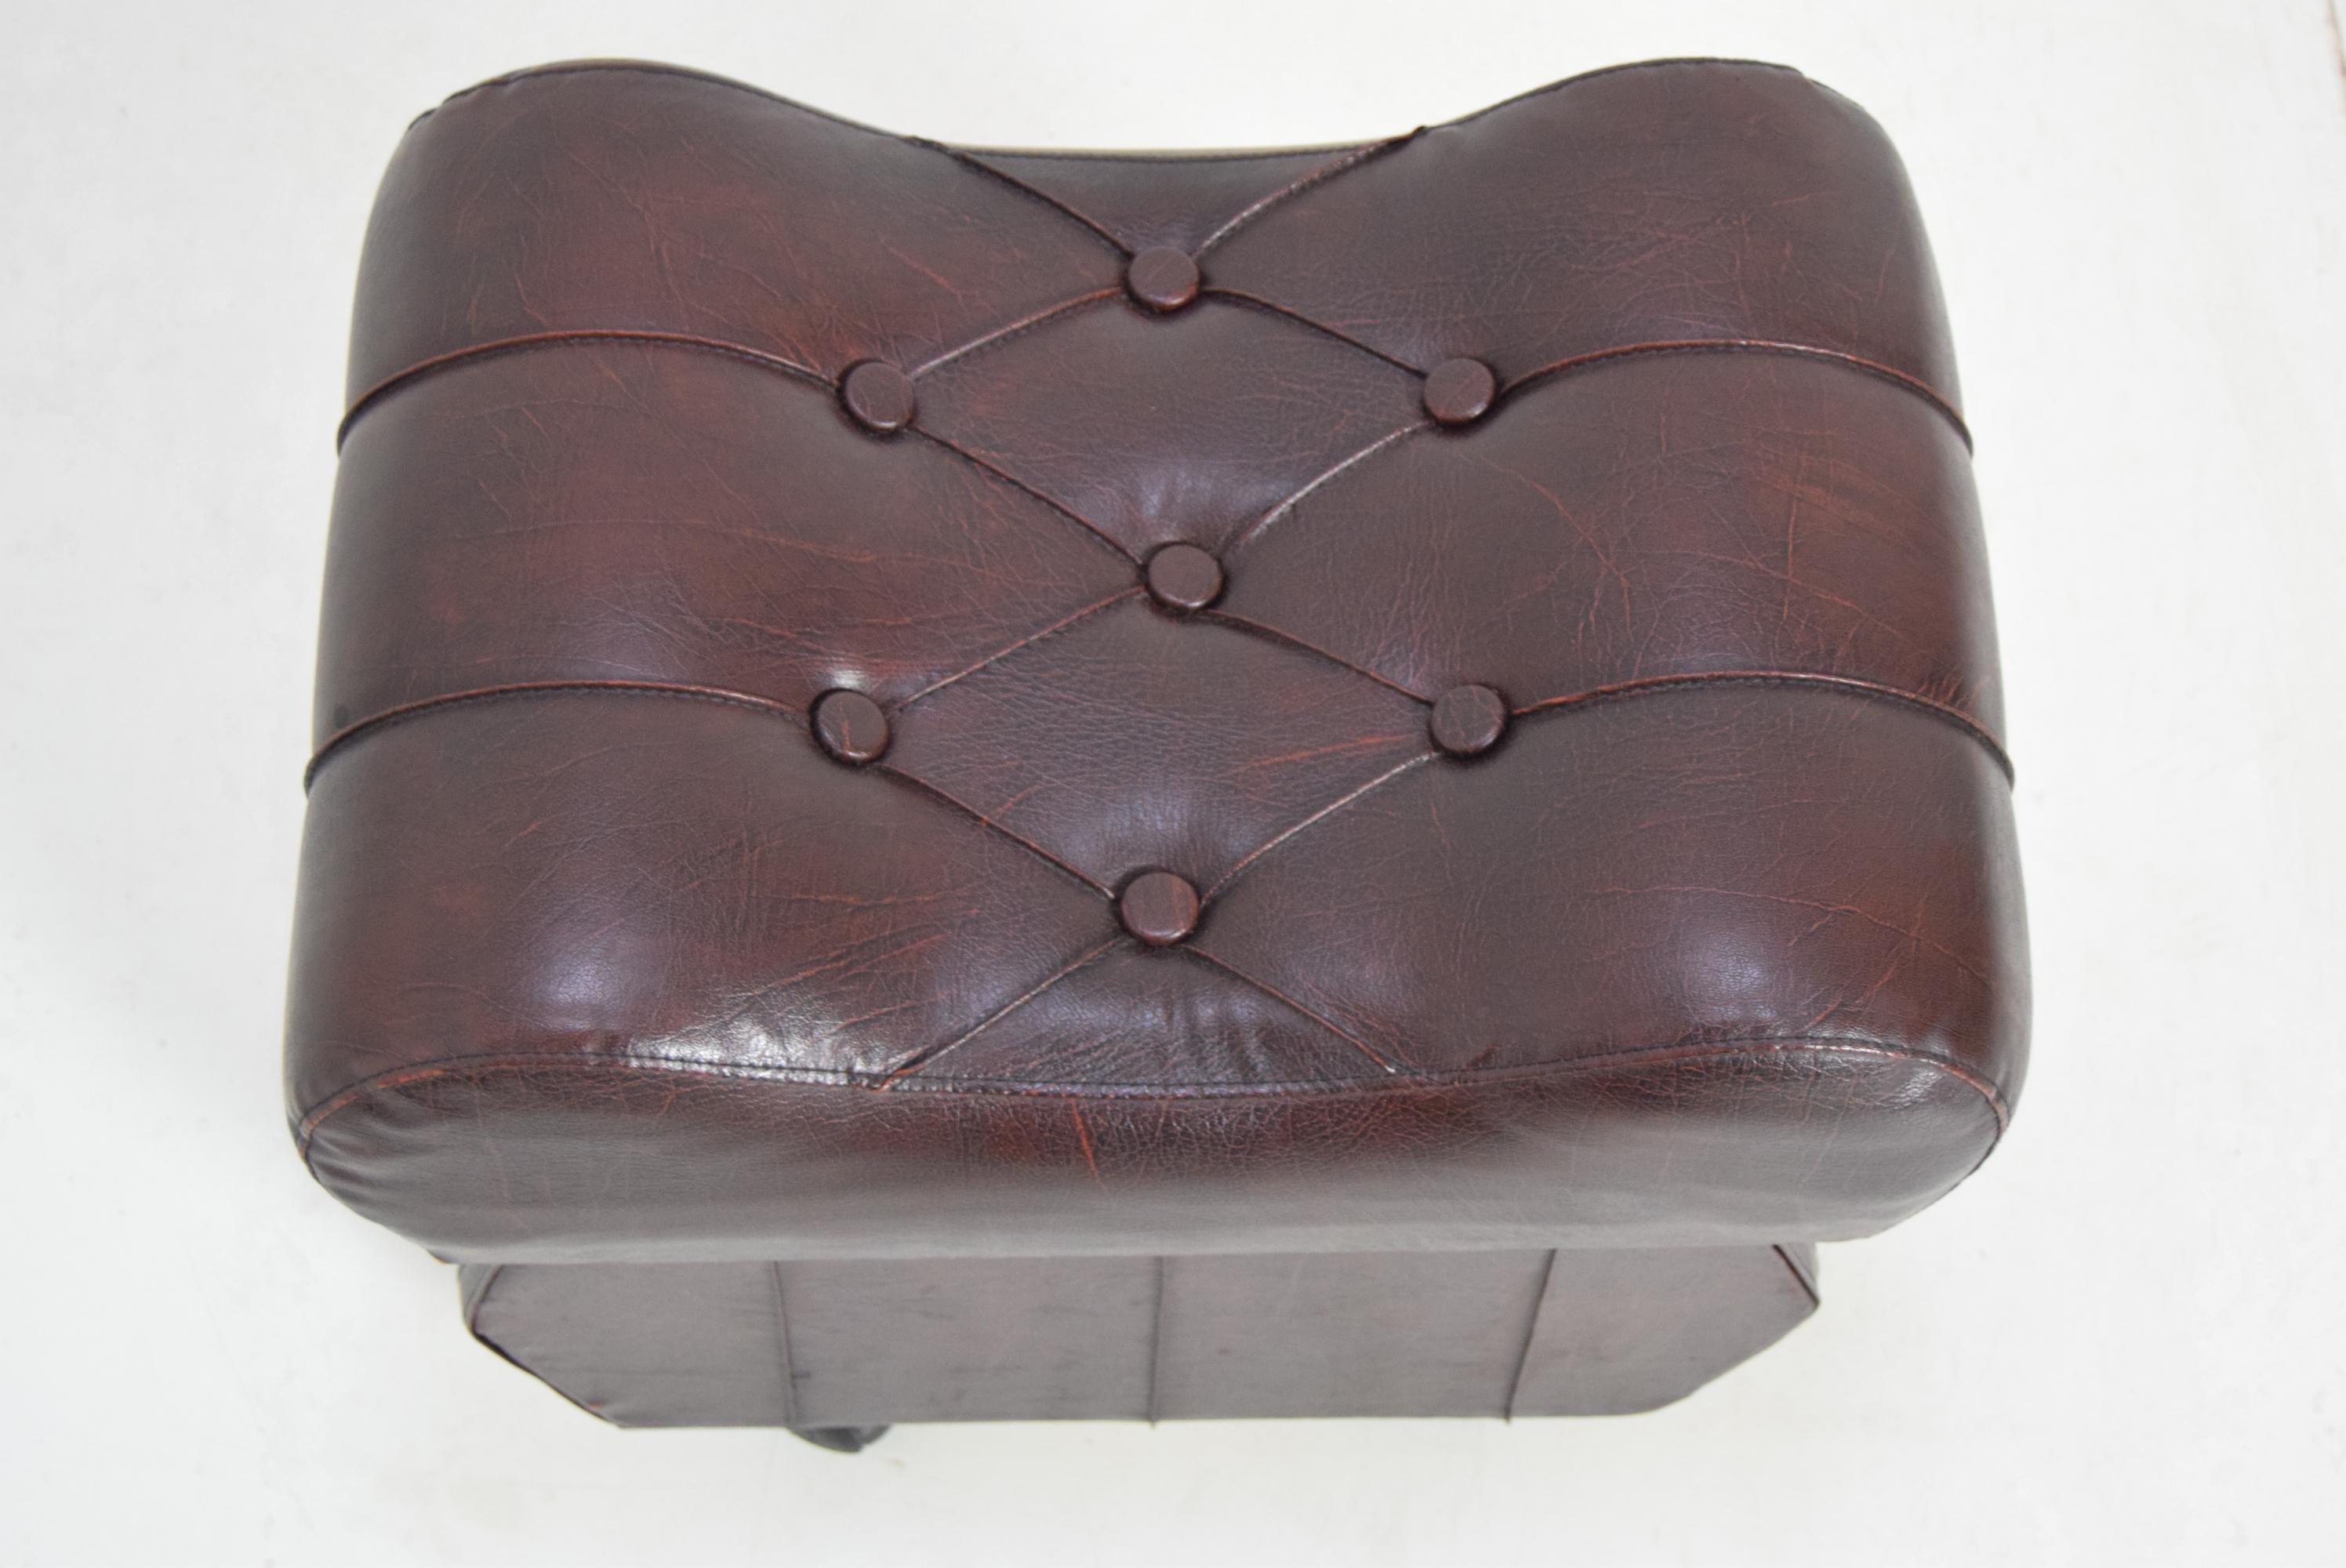 Czech Midcentury Leatherette Stool with Wheels, 1970s For Sale